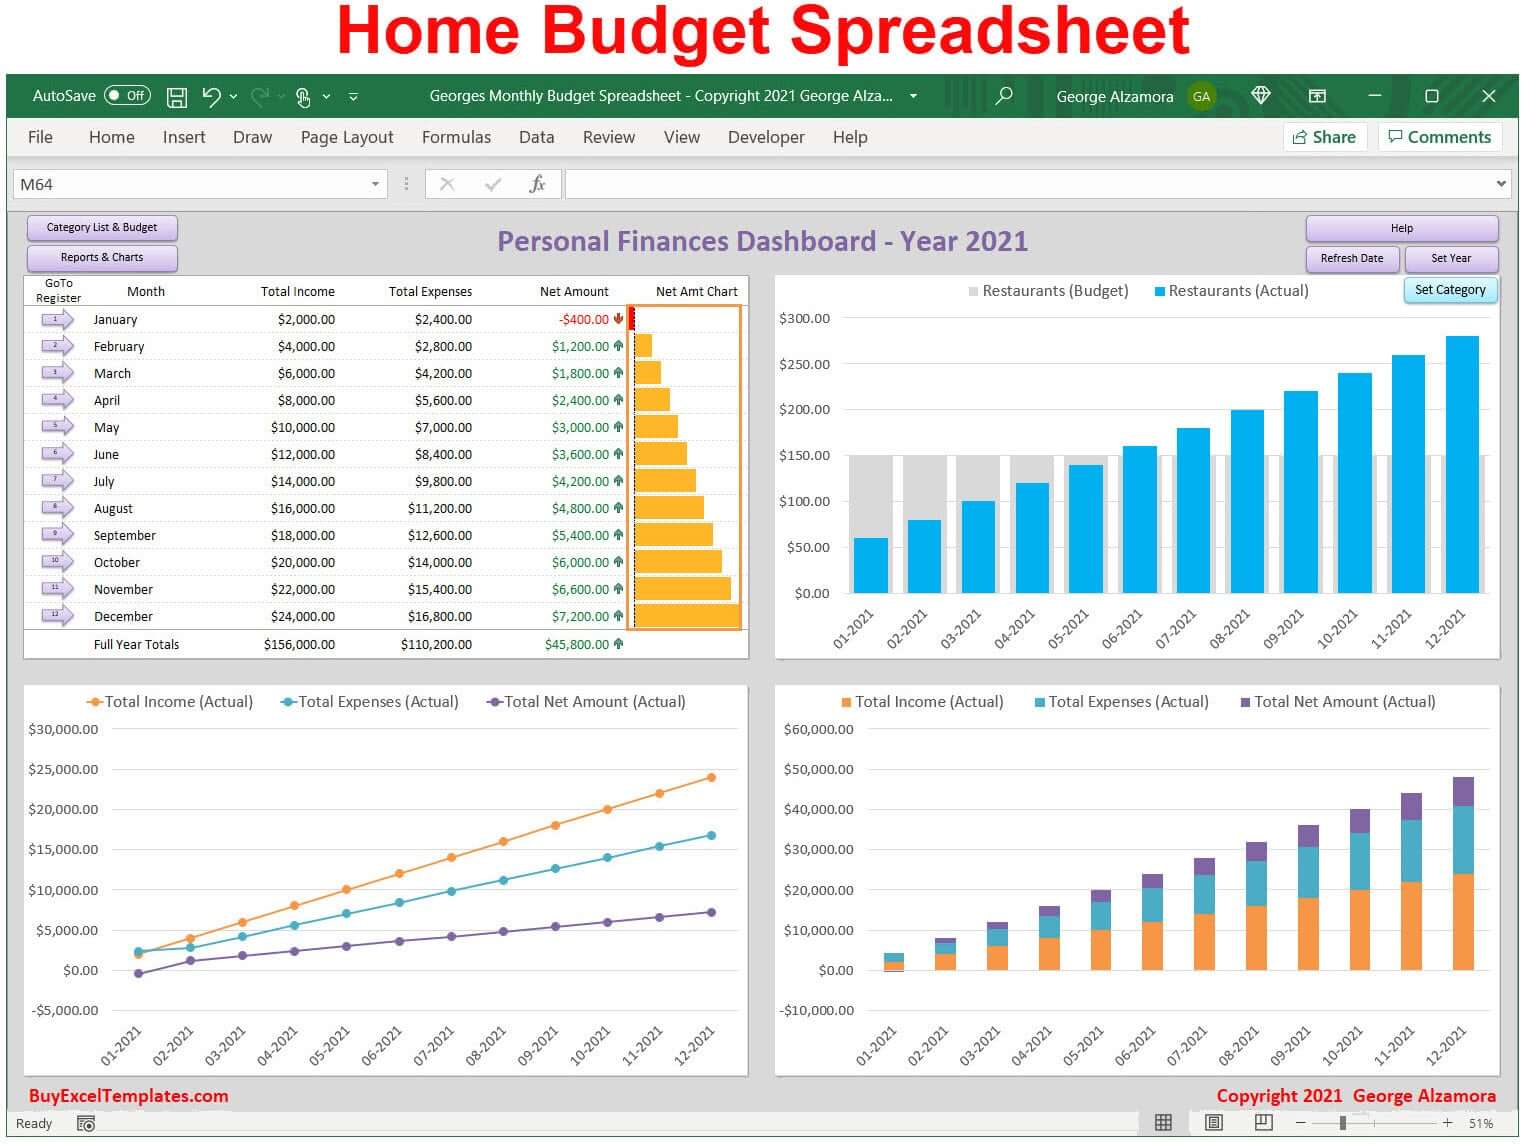 Home monthly budget spreadsheet